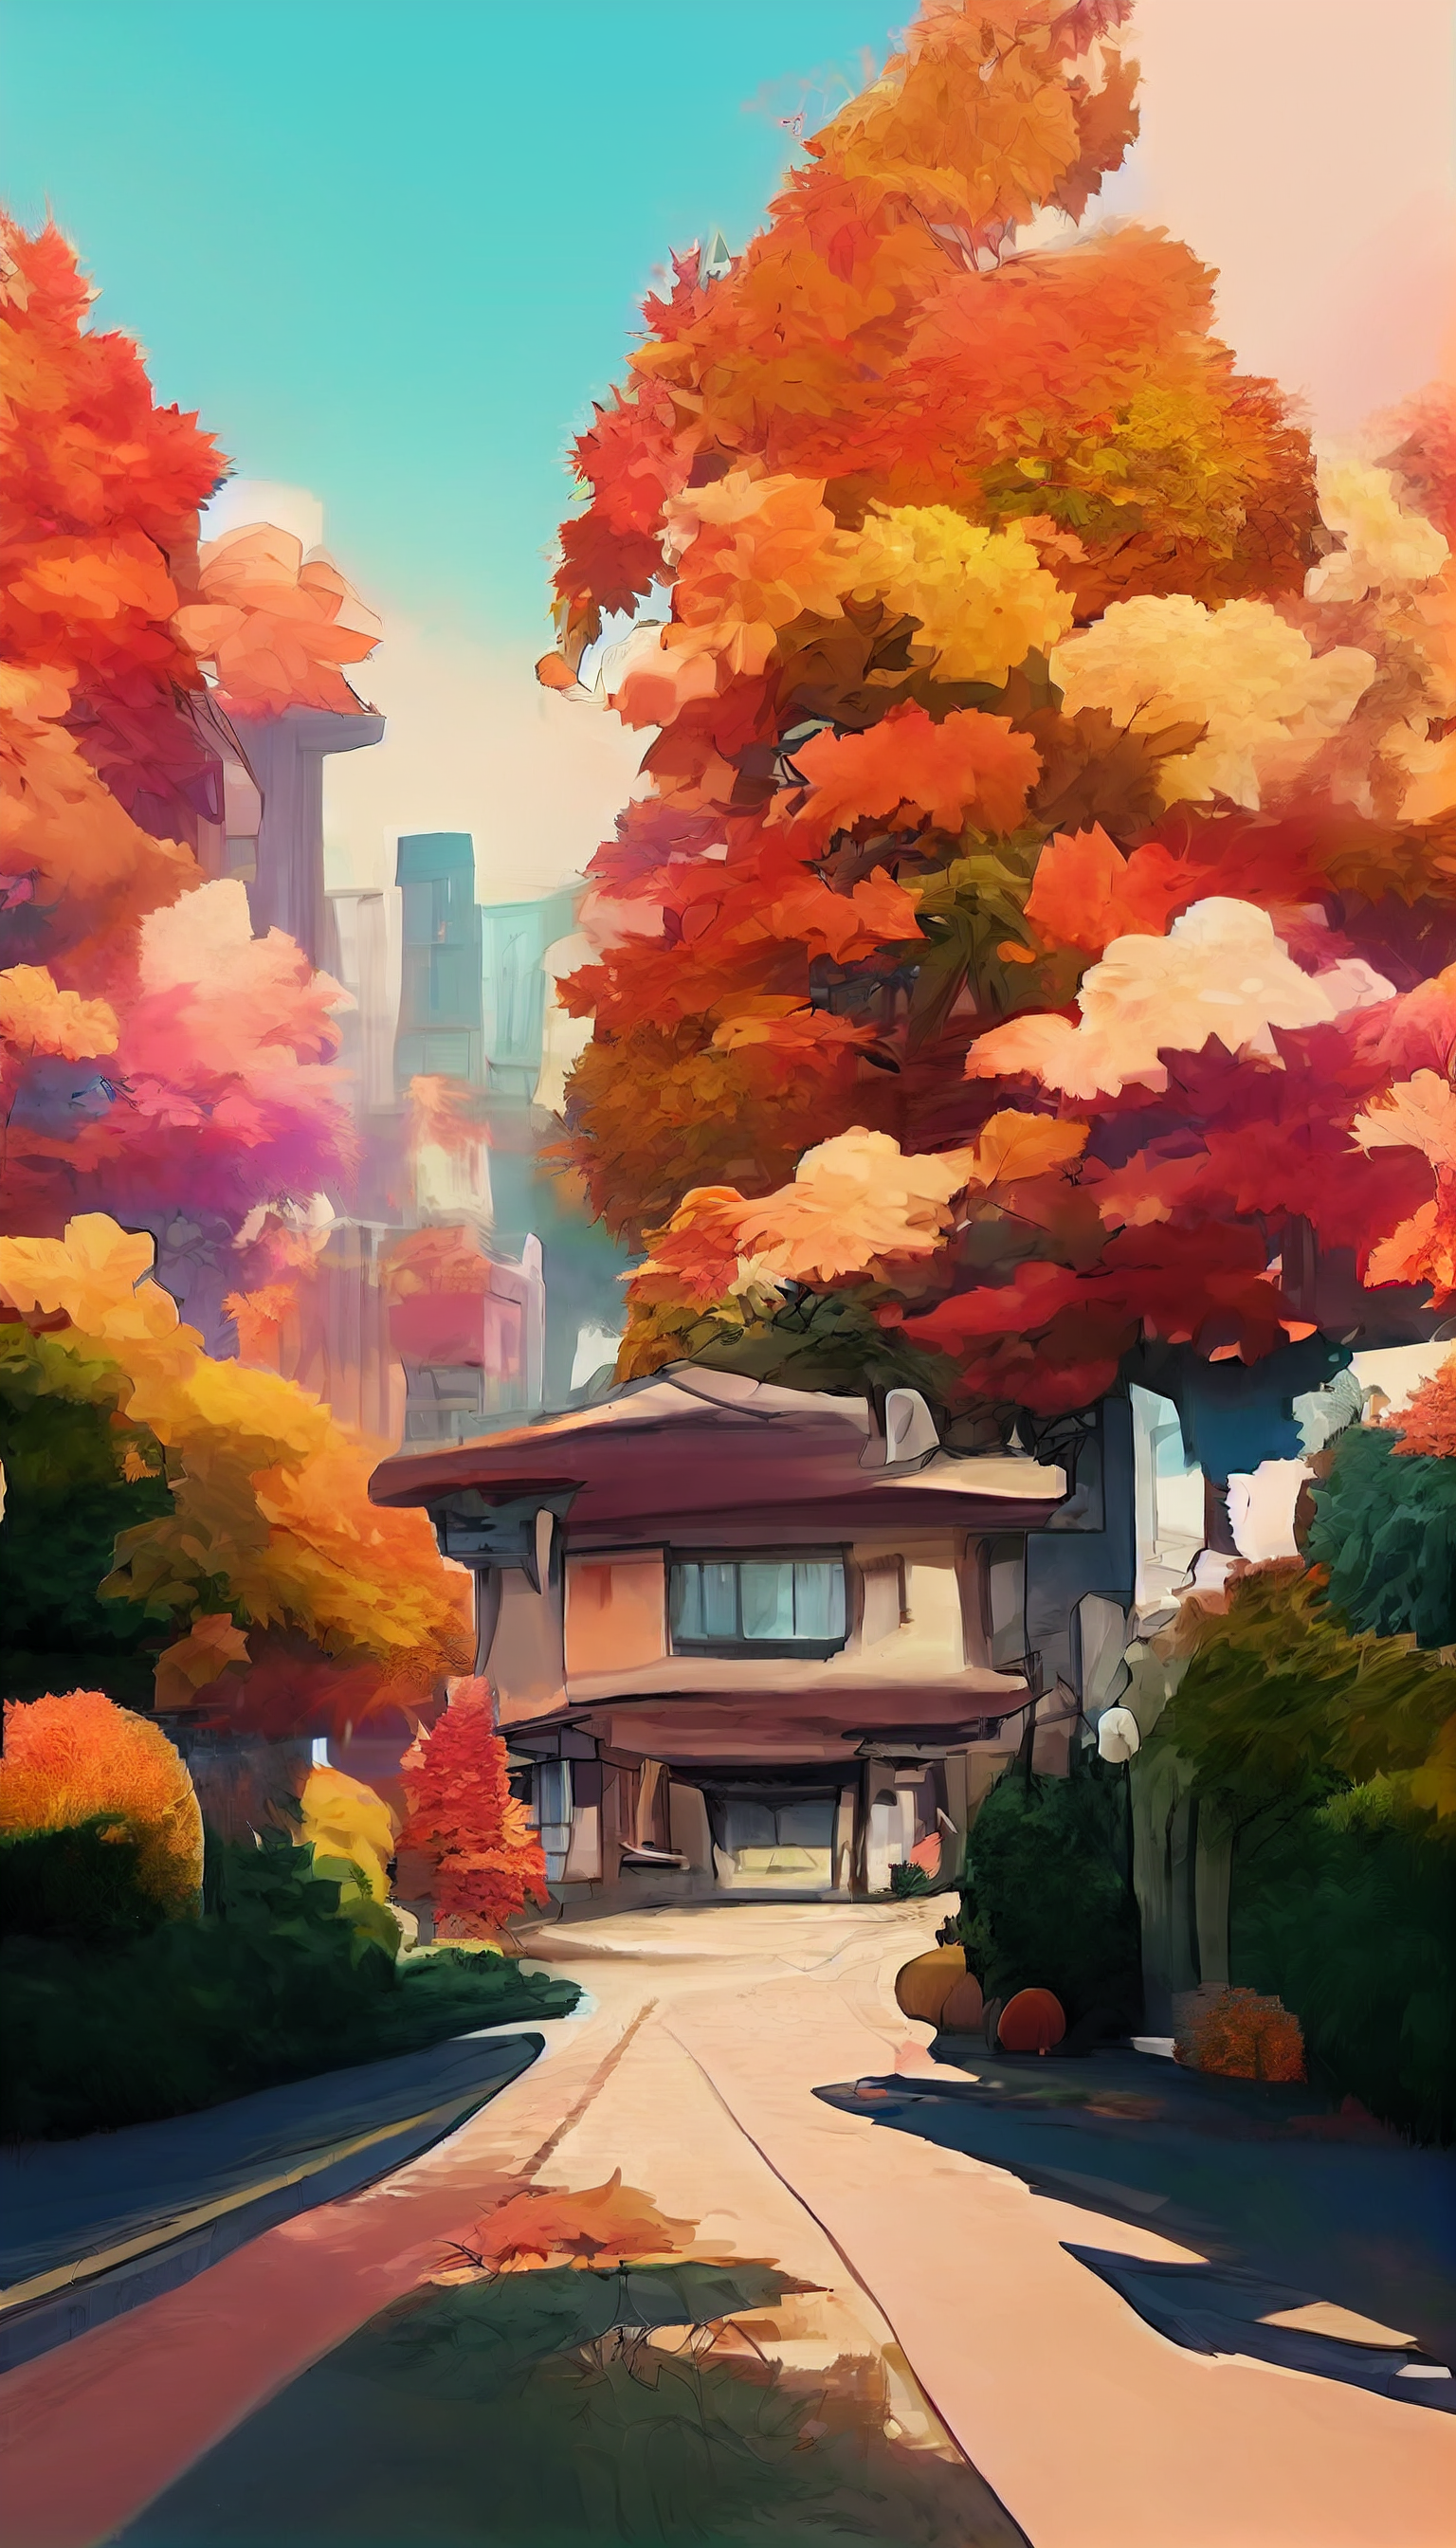 Free Anime Fall Background - Download in Illustrator, EPS, SVG, JPG, PNG |  Template.net